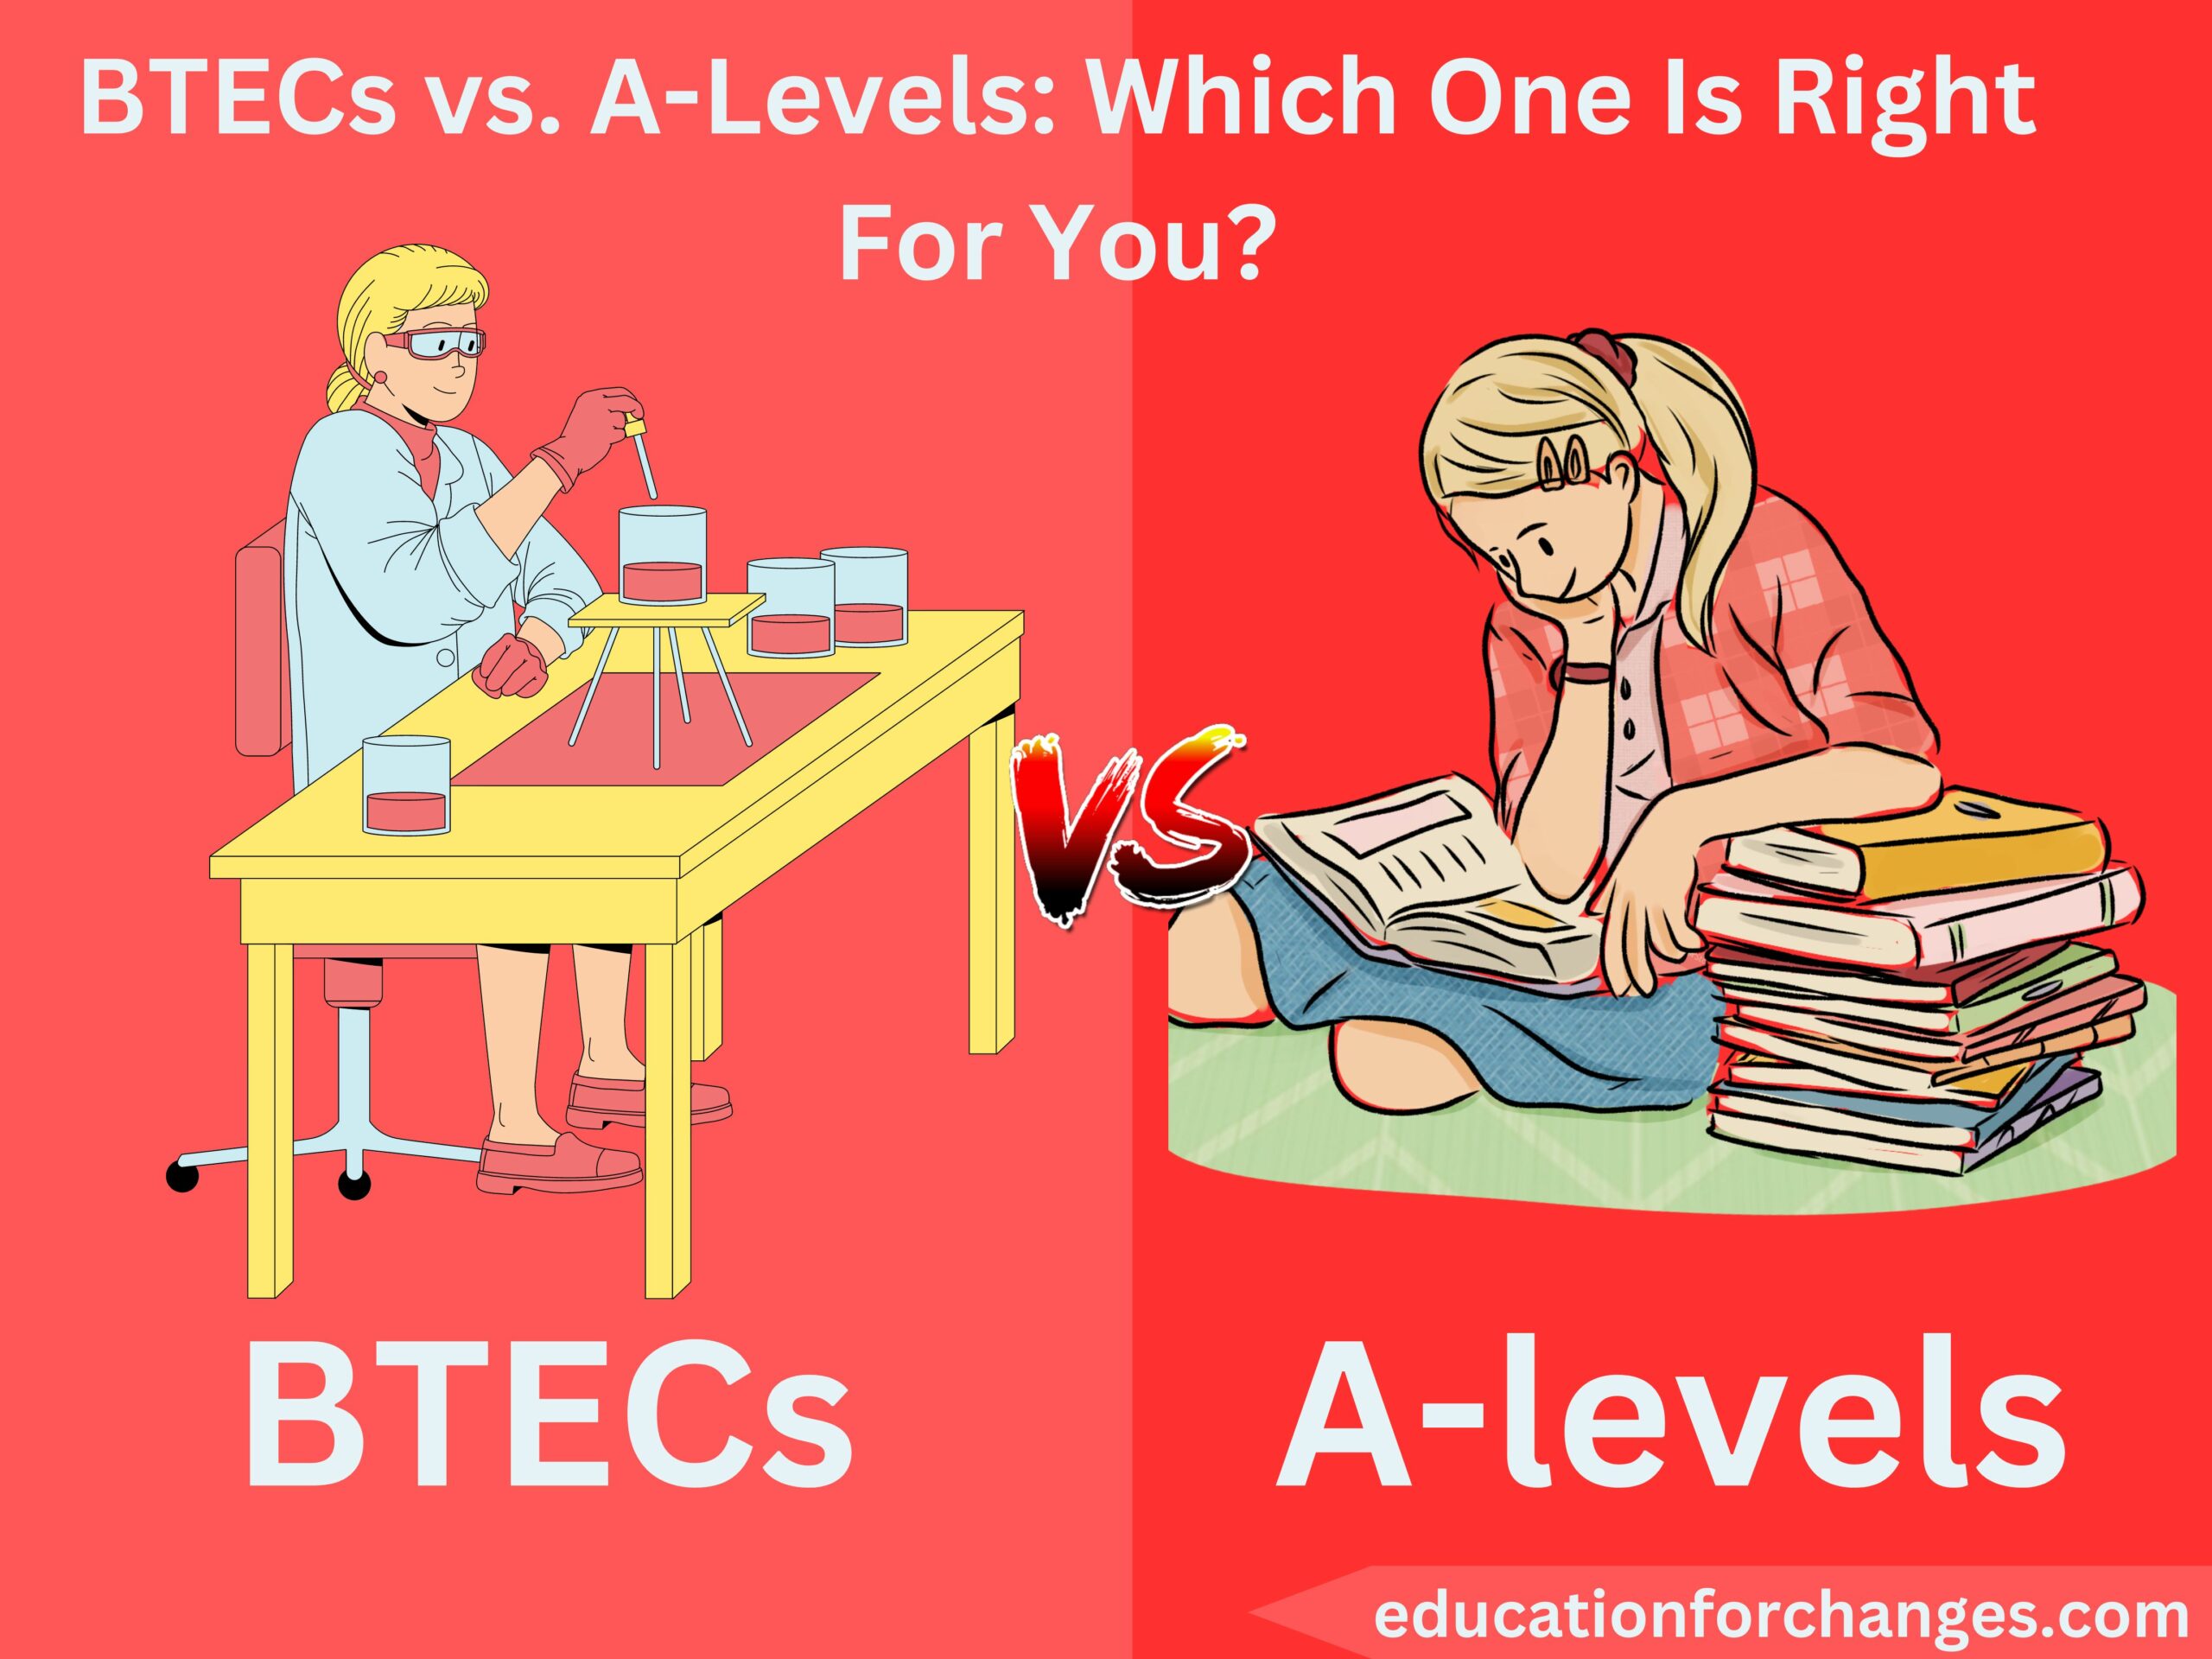 BTECs vs. A-Levels: Which One Is Right For You?